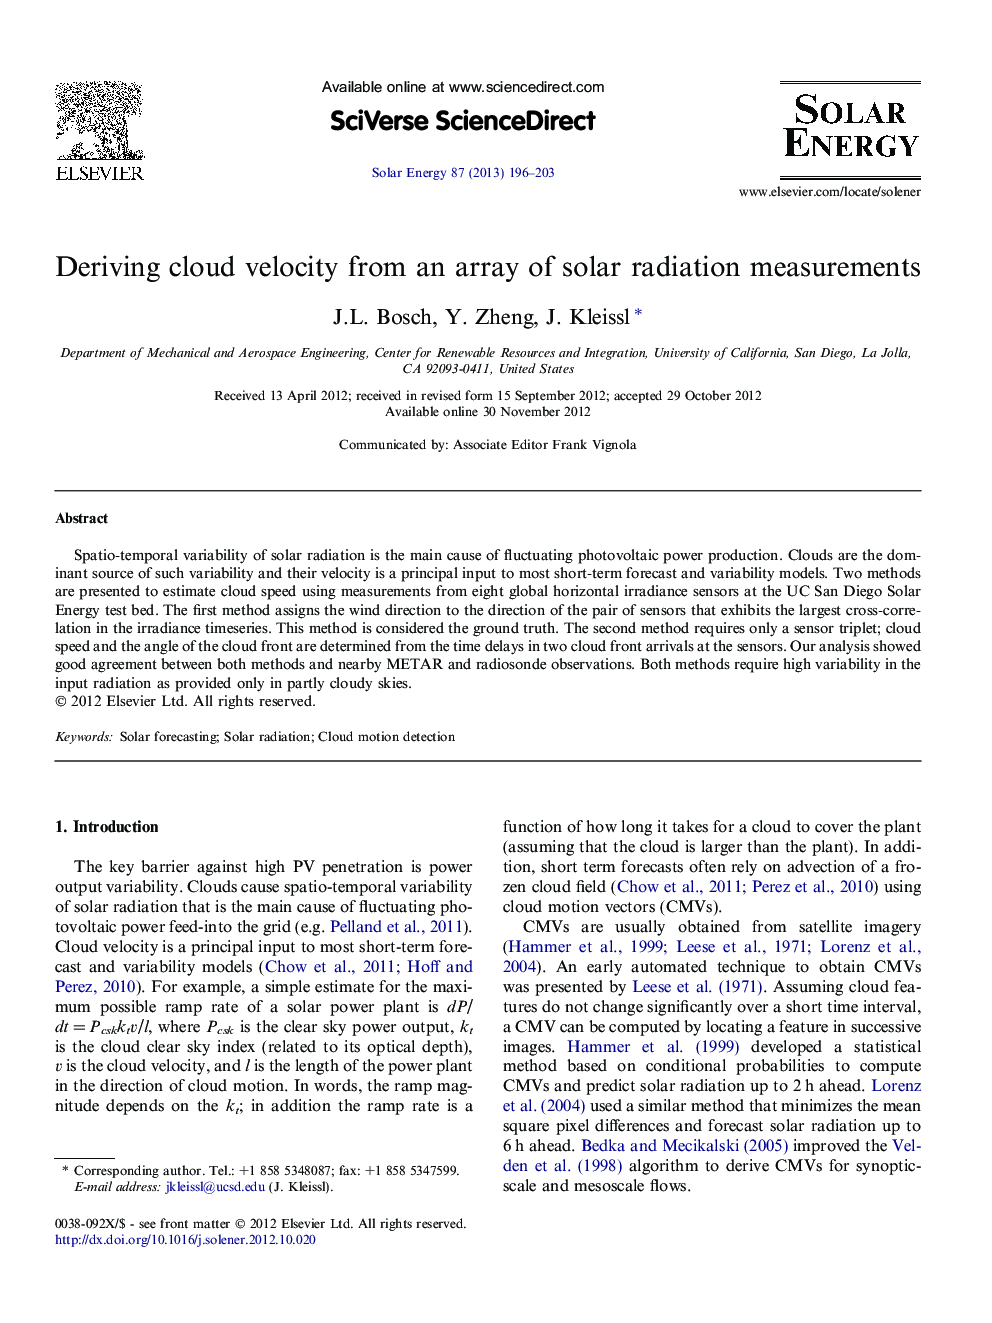 Deriving cloud velocity from an array of solar radiation measurements